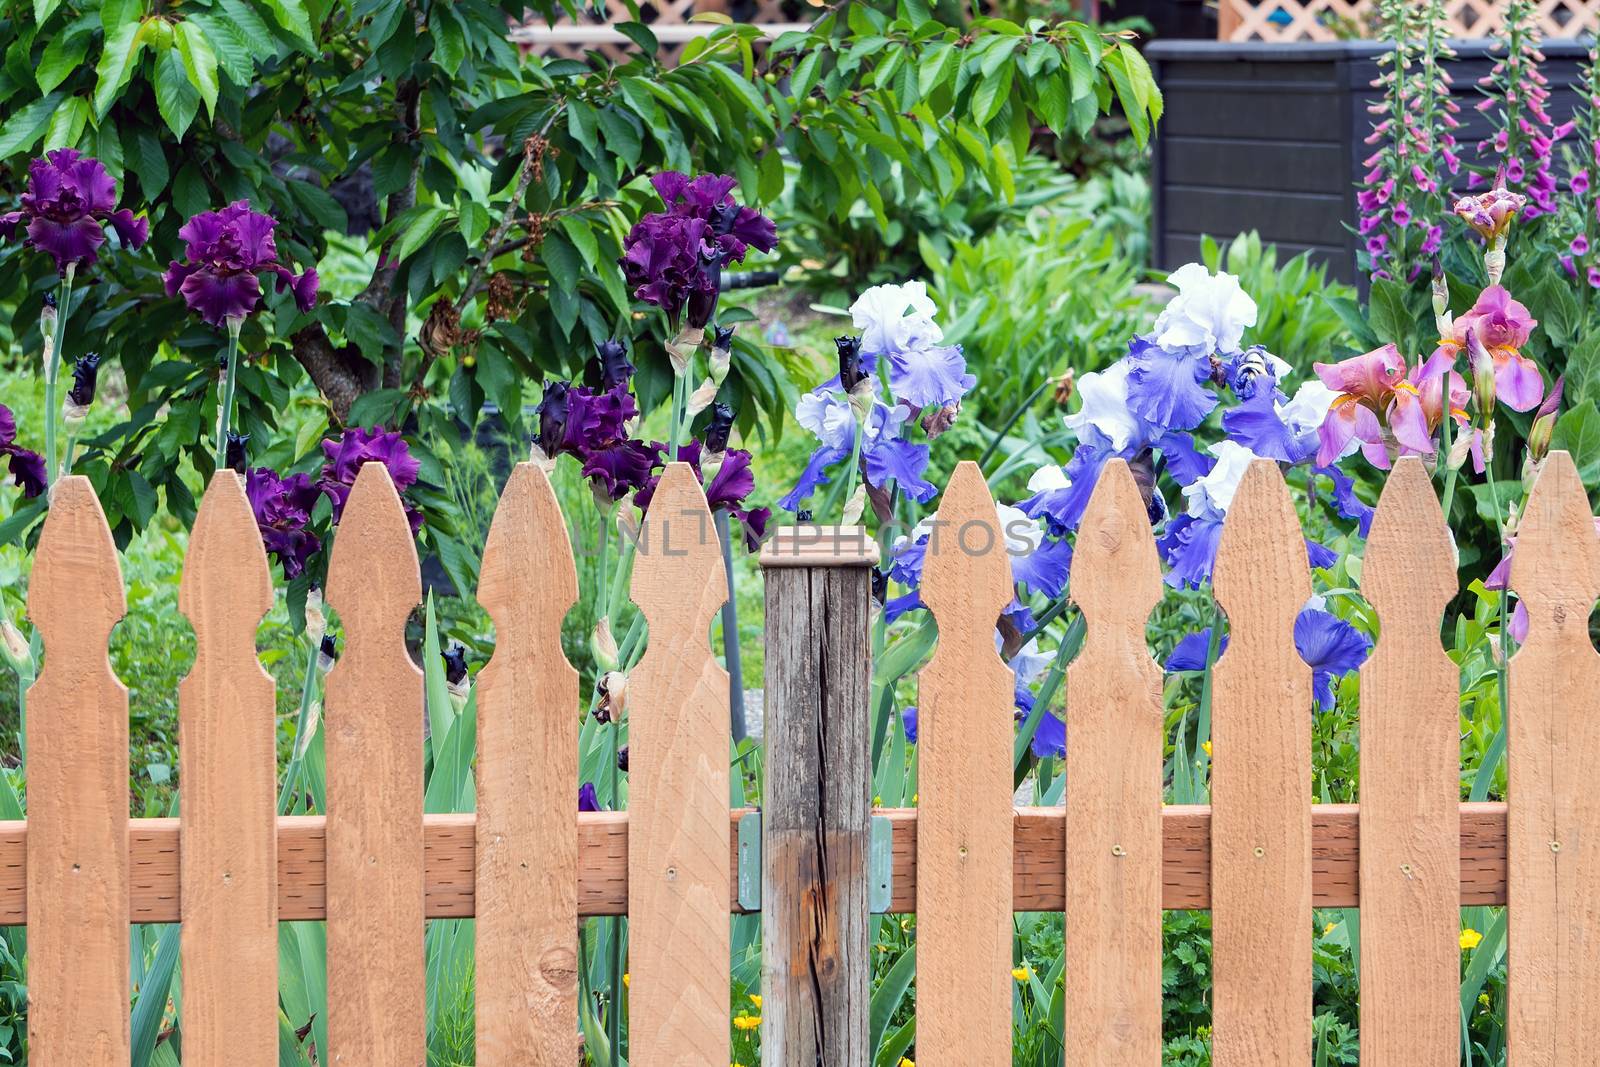 Picket Fence by Colorful Iris Flowers in  Backyard Garden by Davidgn